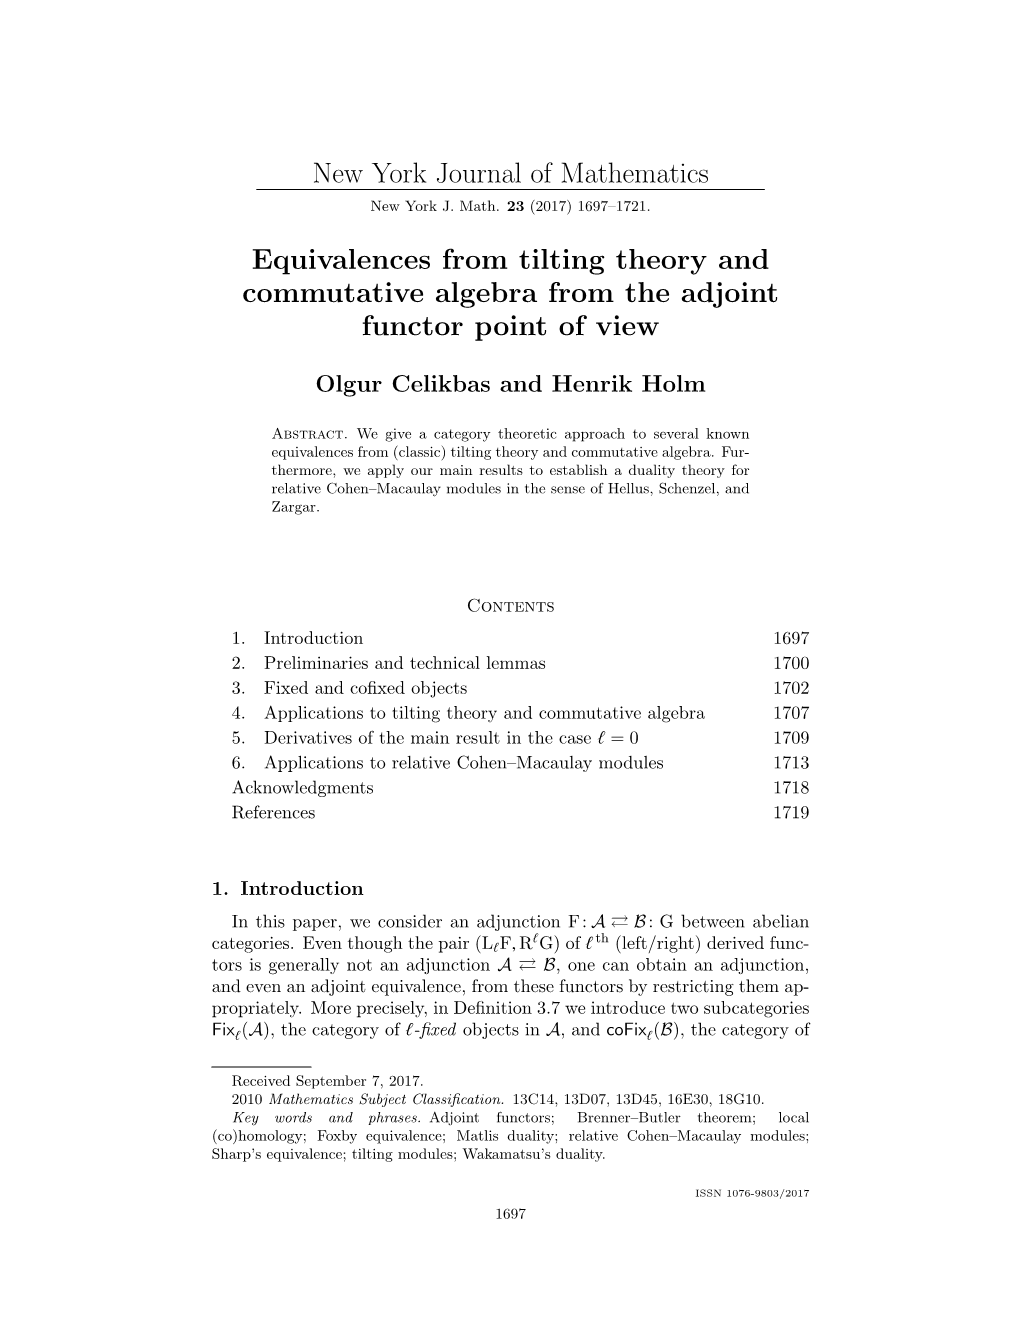 New York Journal of Mathematics Equivalences from Tilting Theory And